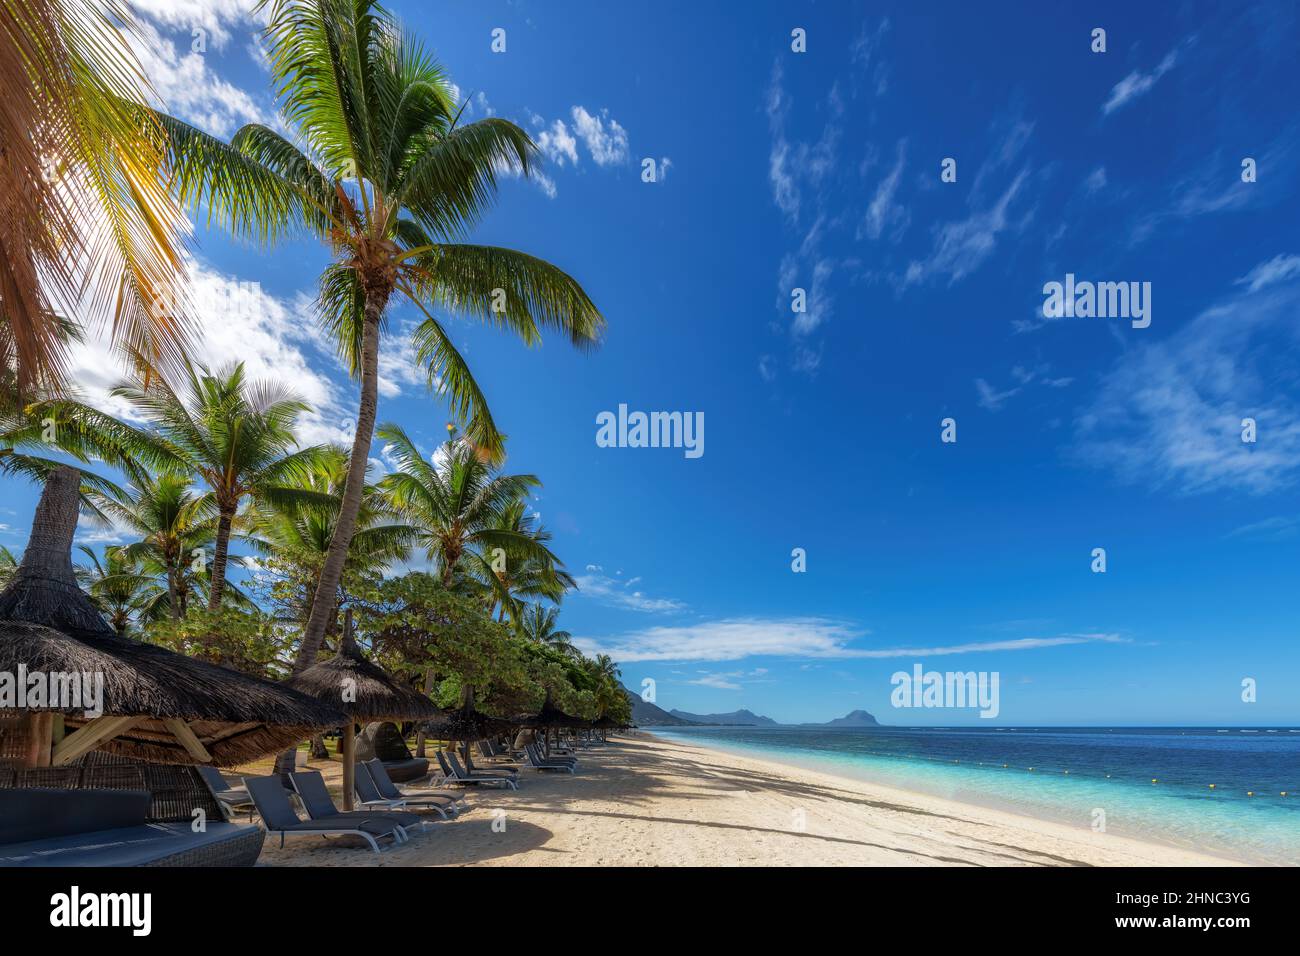 Paradise beach and palm trees in tropical resort Stock Photo